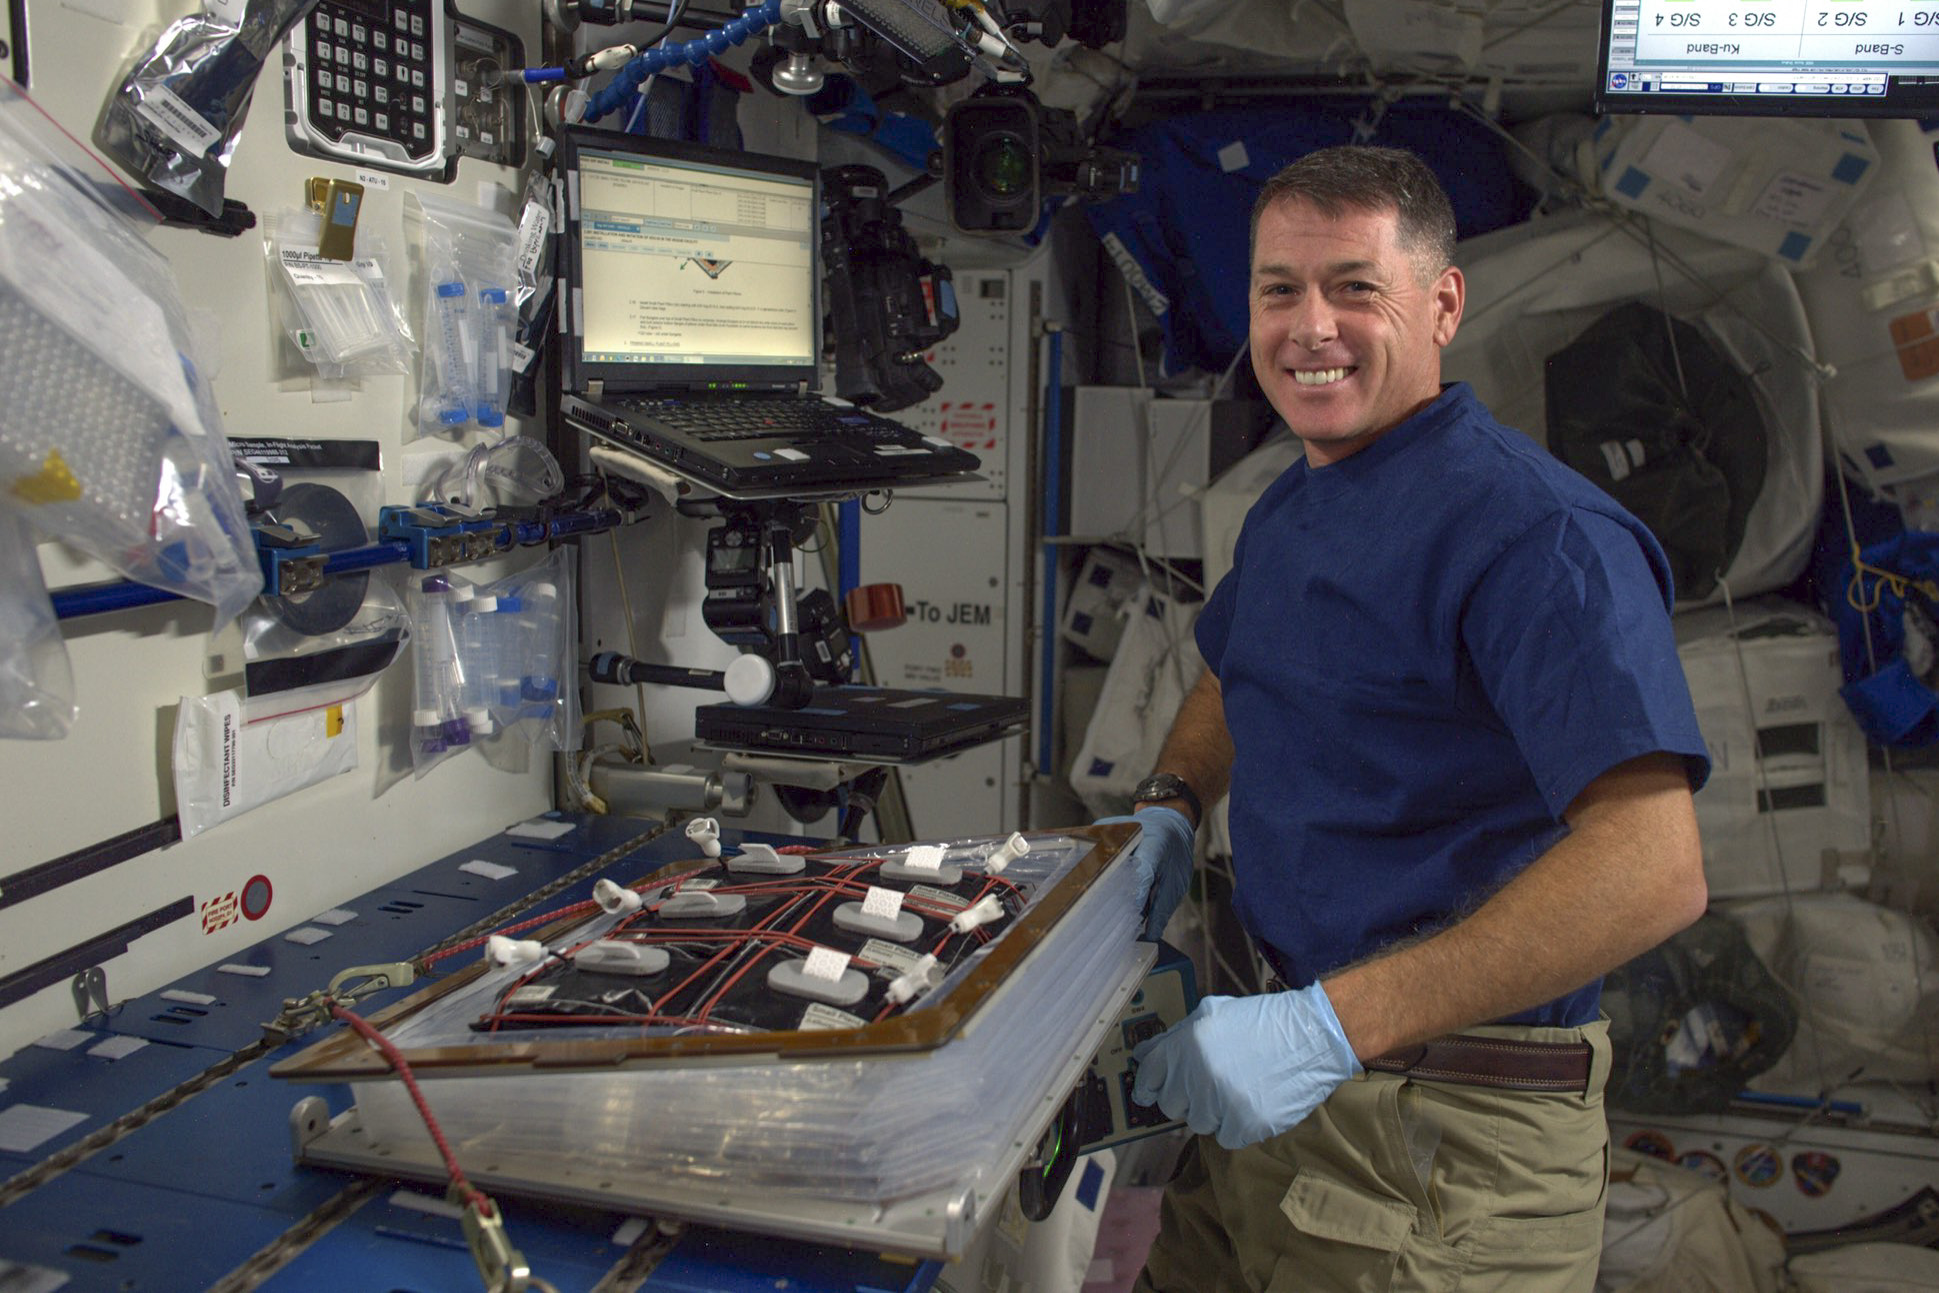 Shane Kimbrough planted an on-orbit crop of red romaine lettuce on October 25 while onboard the International Space Station. Courtesy: NASA